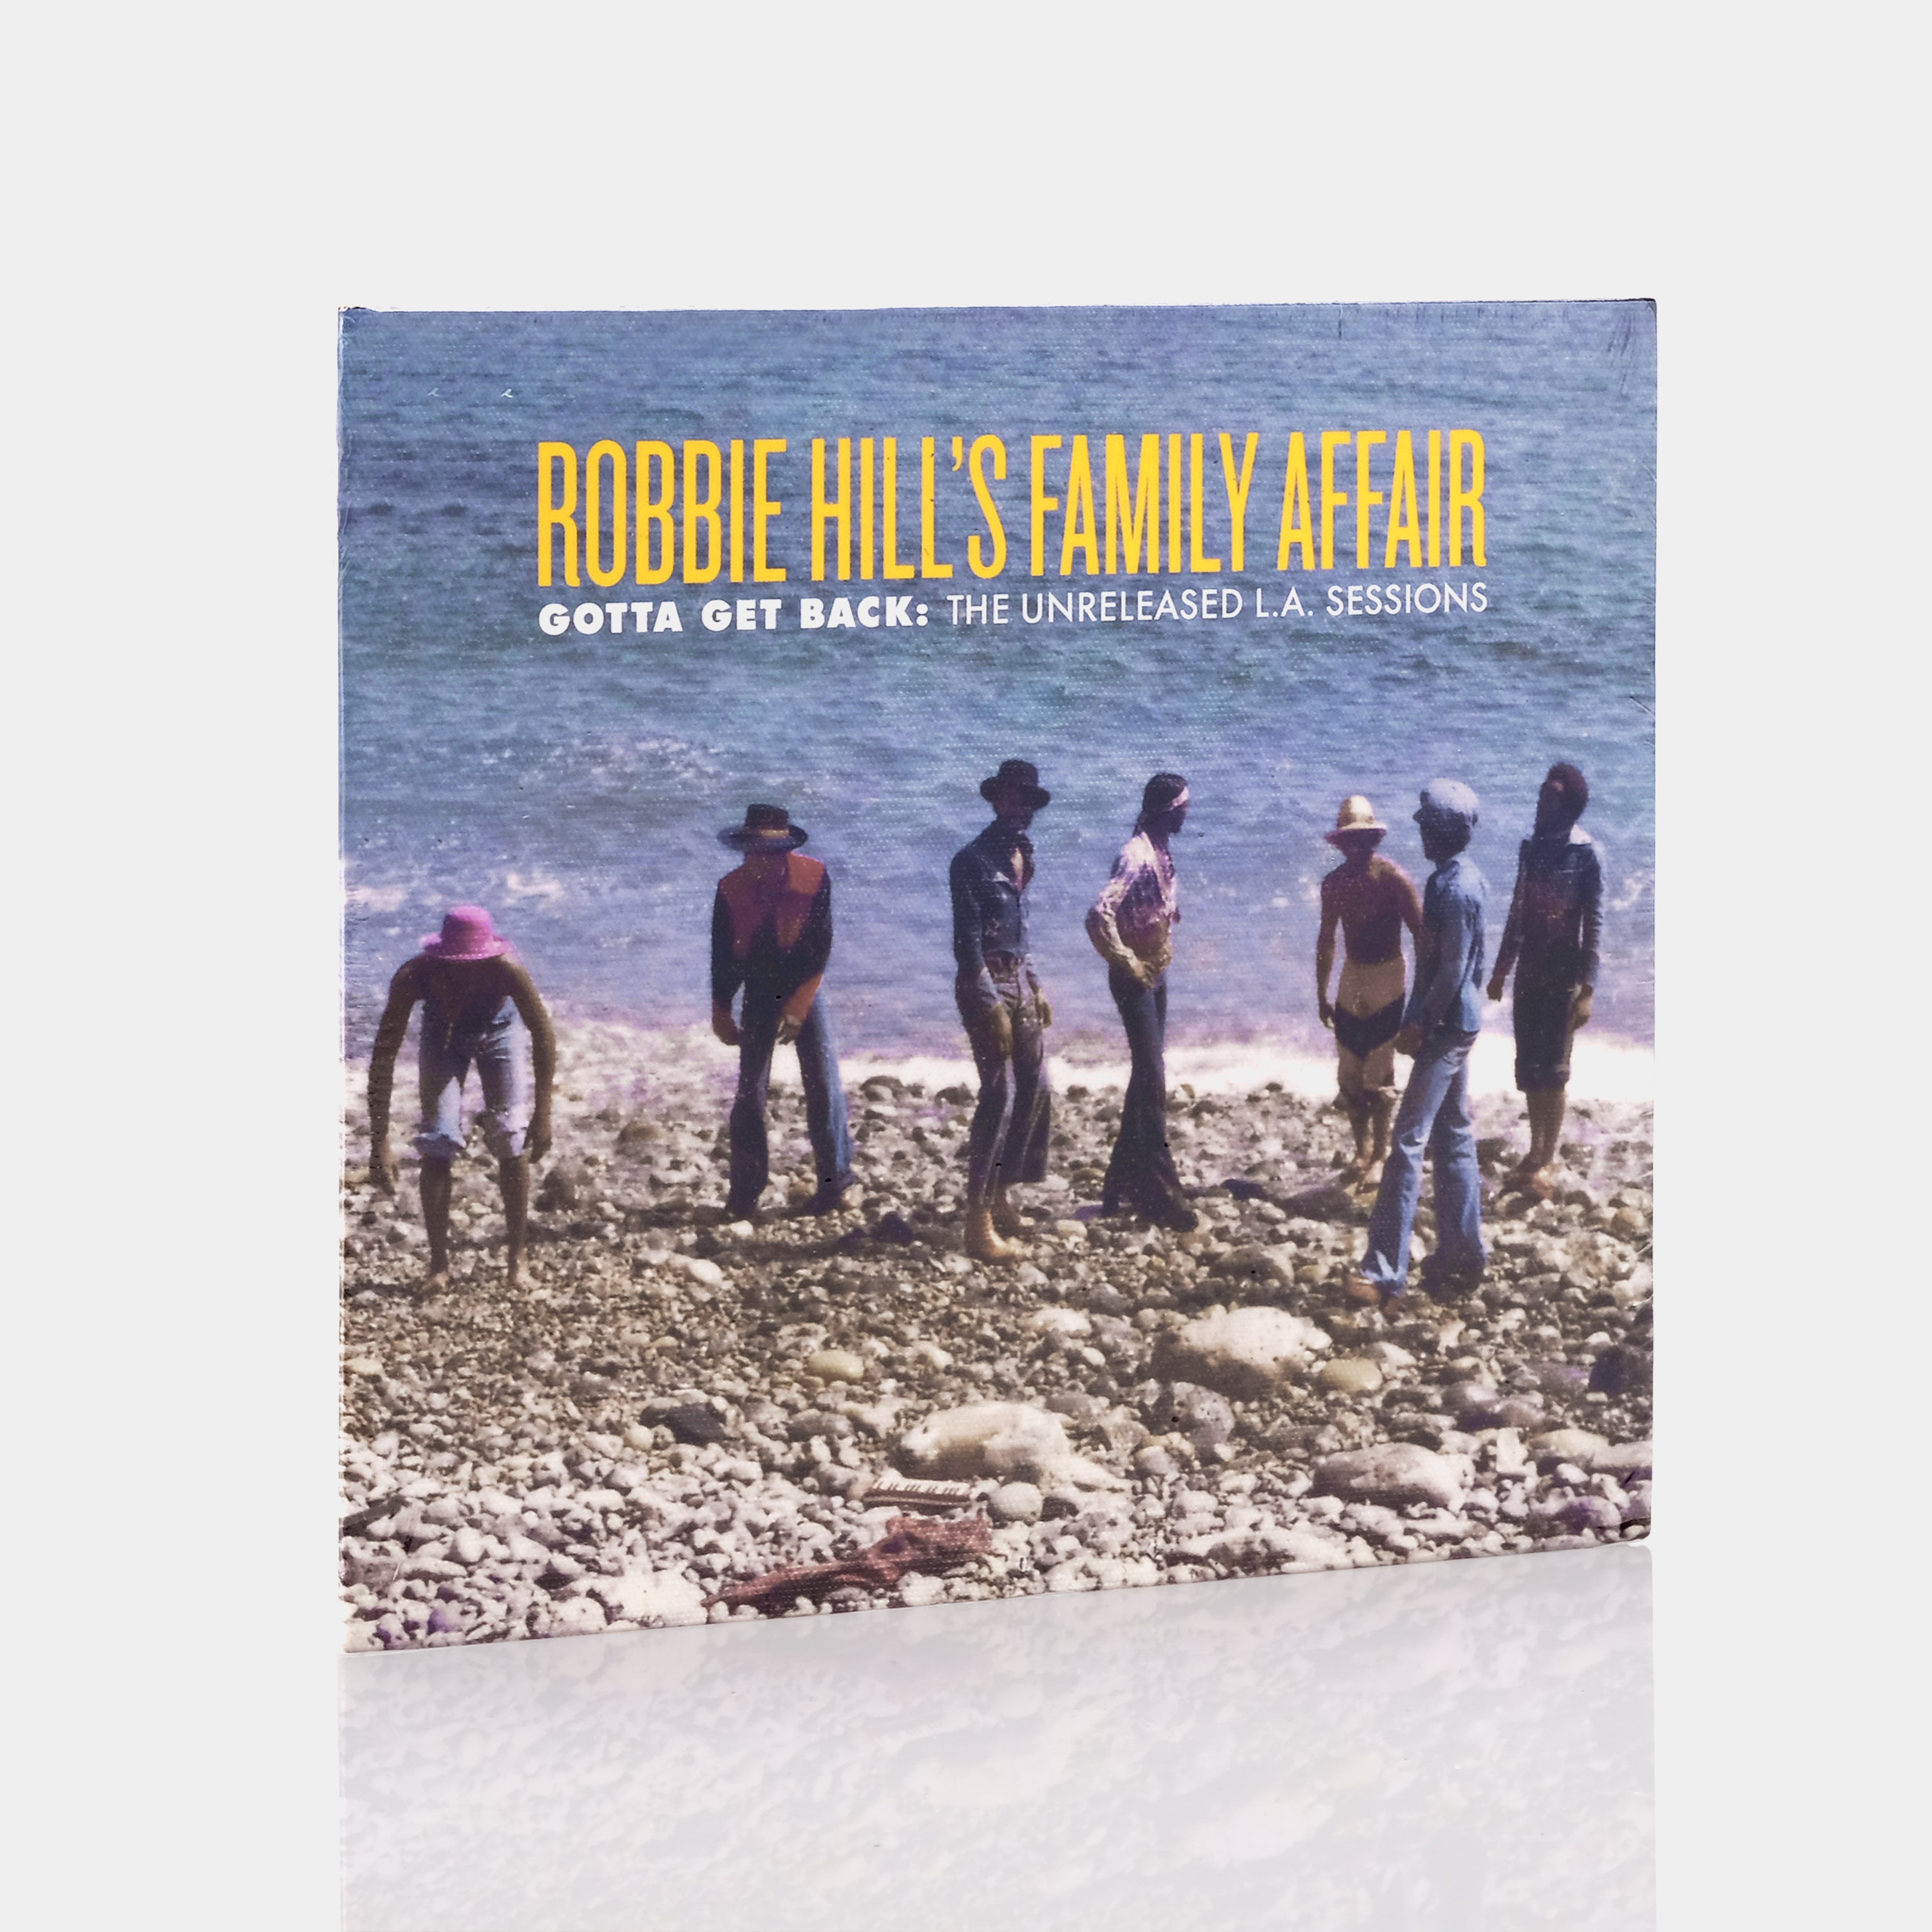 Robbie Hill's Family Affair - Gotta Get Back: The Unreleased L.A. Sessions CD